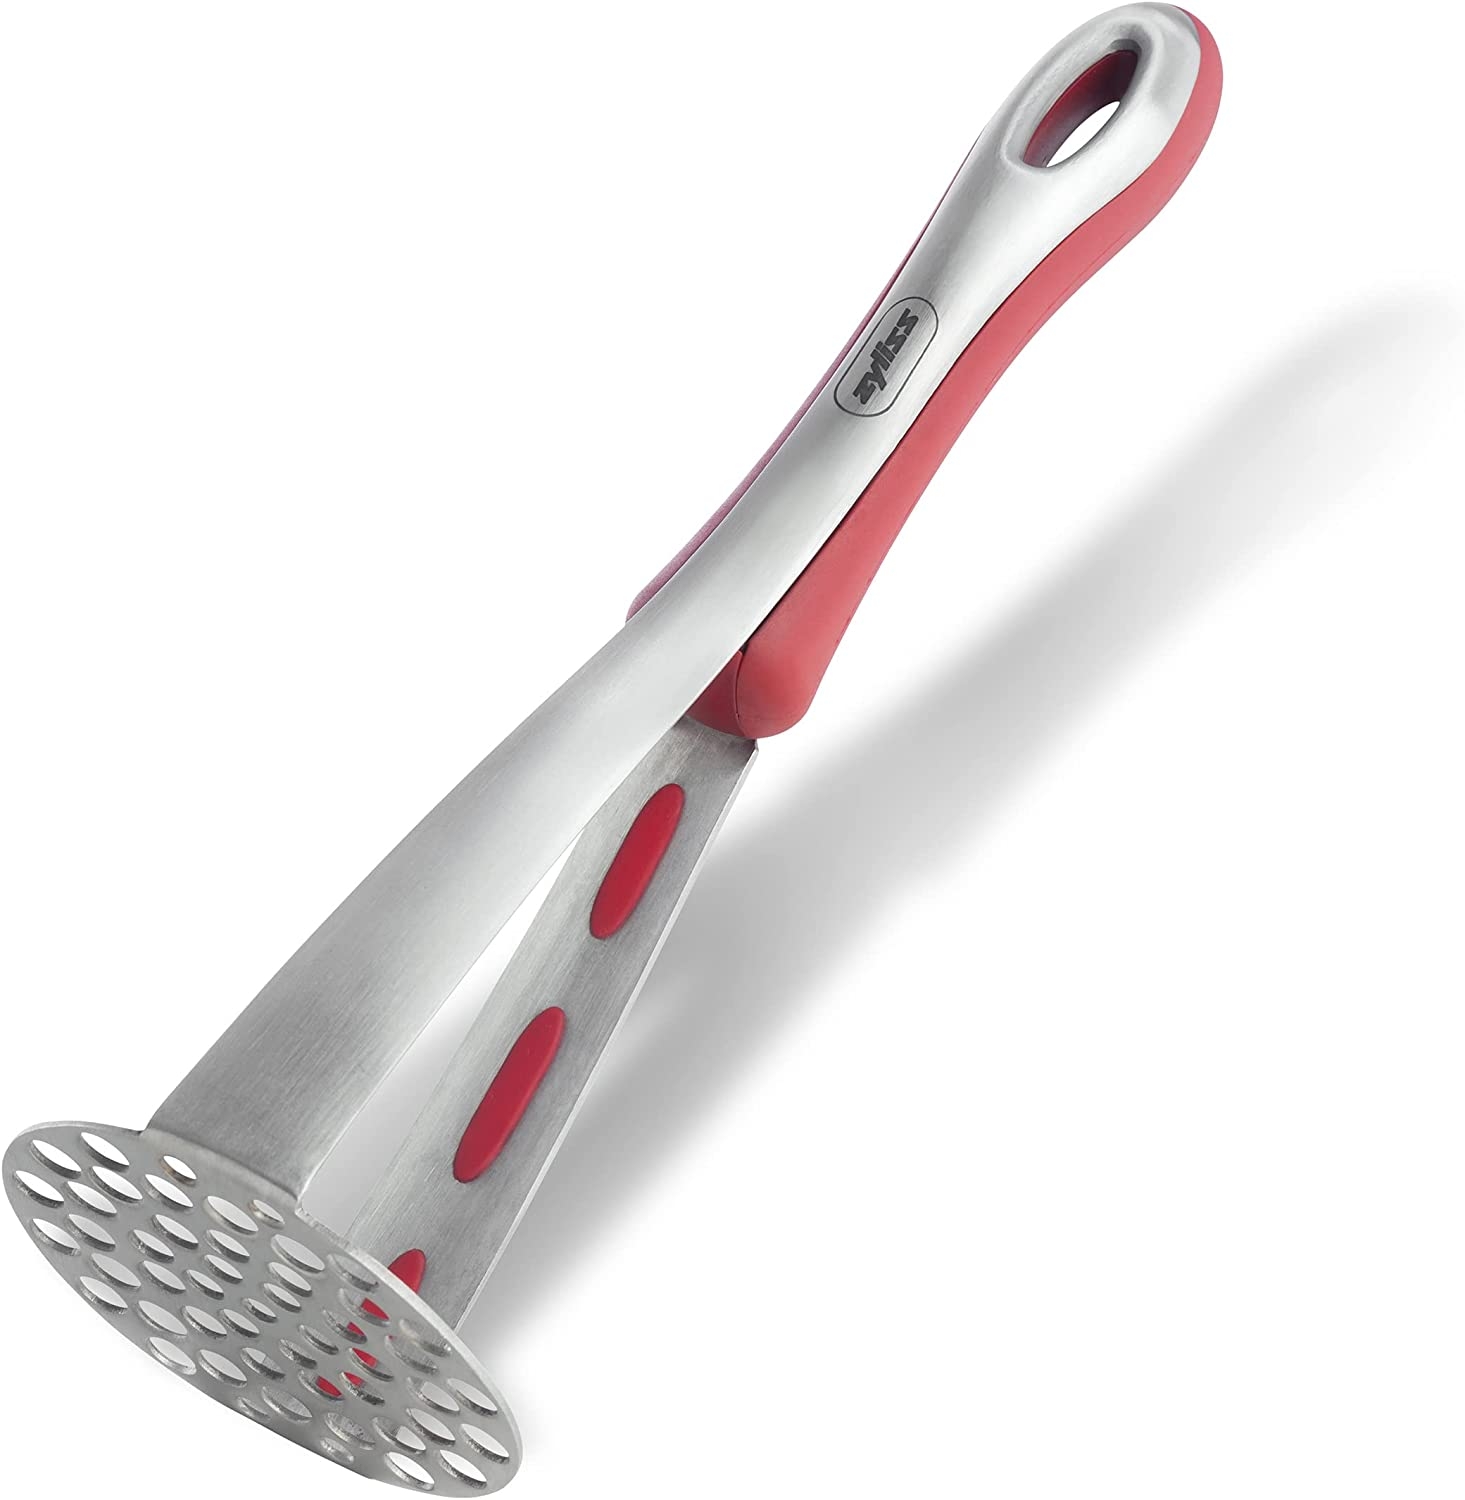 Zyliss Stainless Steel Potato Masher – Stainless Steel Metal Potato & Vegetable Masher – Silicone Bowl Scraper & Integrated